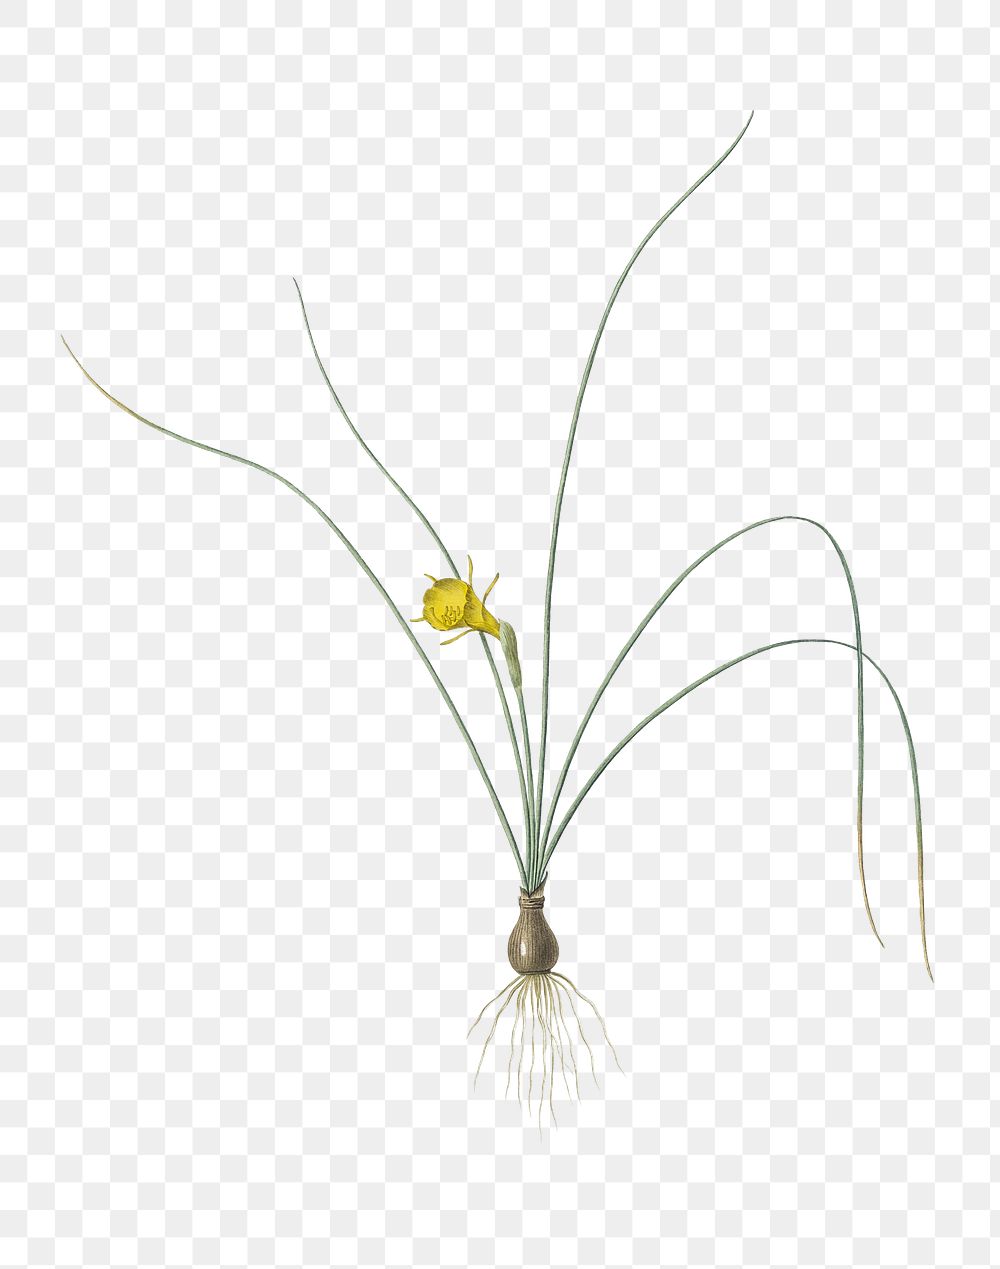  Petticoat daffodil png, transparent background 